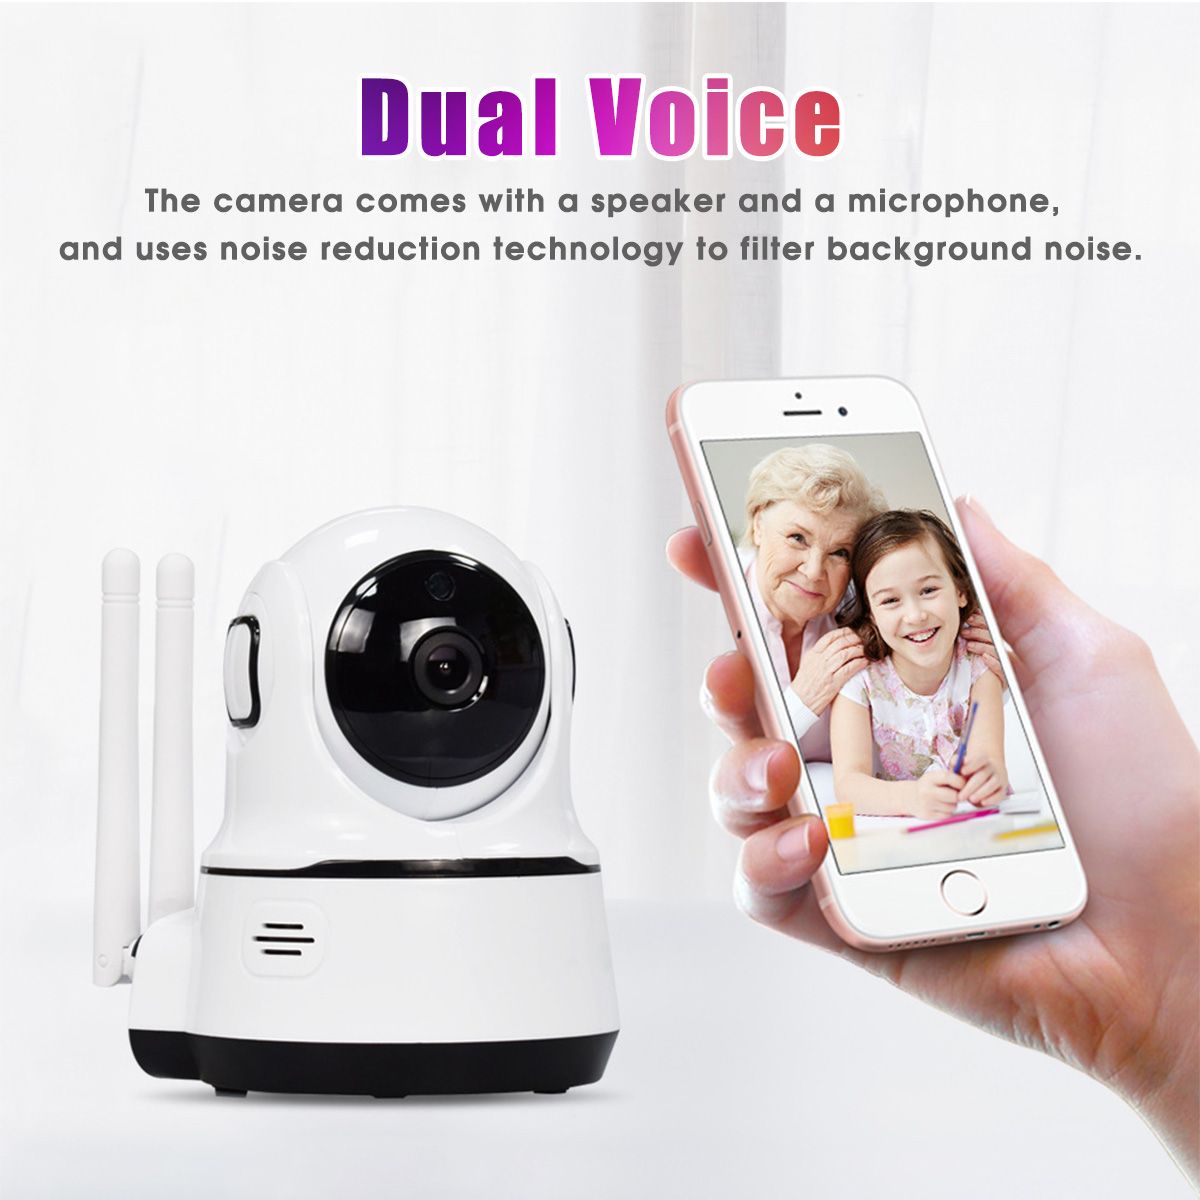 HD-1080P-200W-Wireless-WiFi-IP-Security-Camera-Indoor-CCTV-Home-Smart-Baby-Monitor-PTZ-Roration-with-1614750